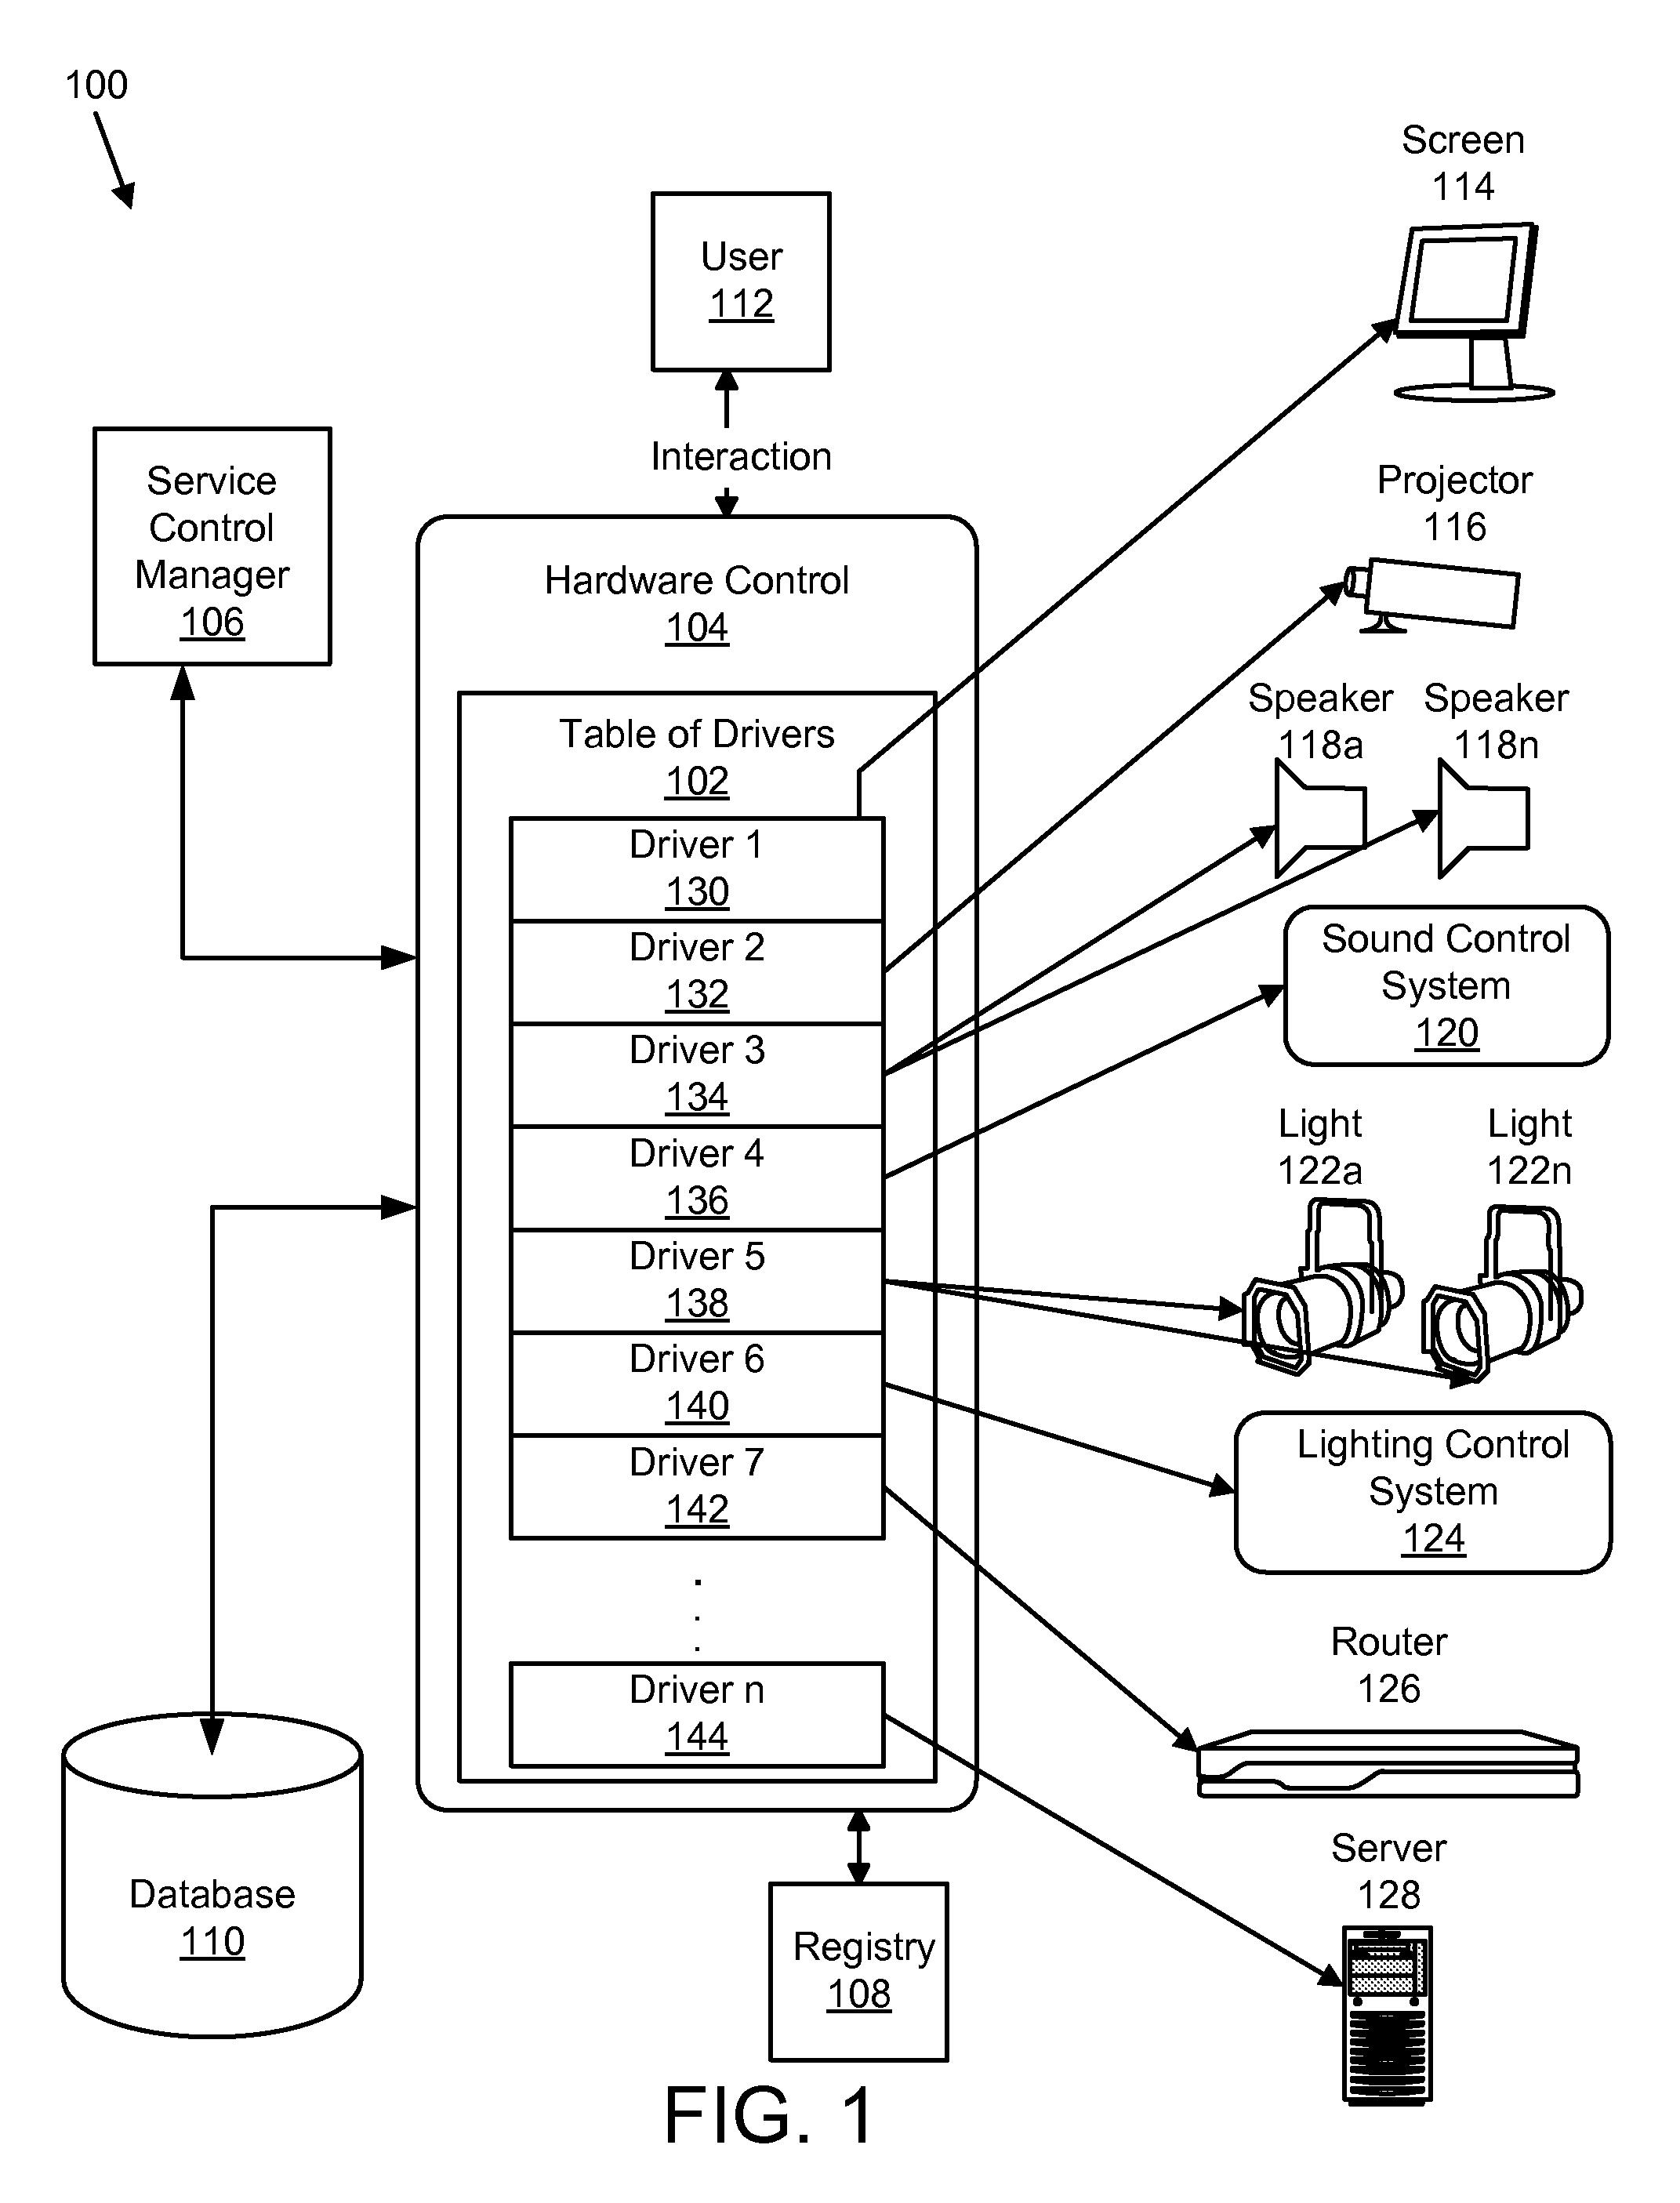 Apparatus, system, and method for coordinating web-based development of drivers & interfacing software used to implement a multi-media teaching system